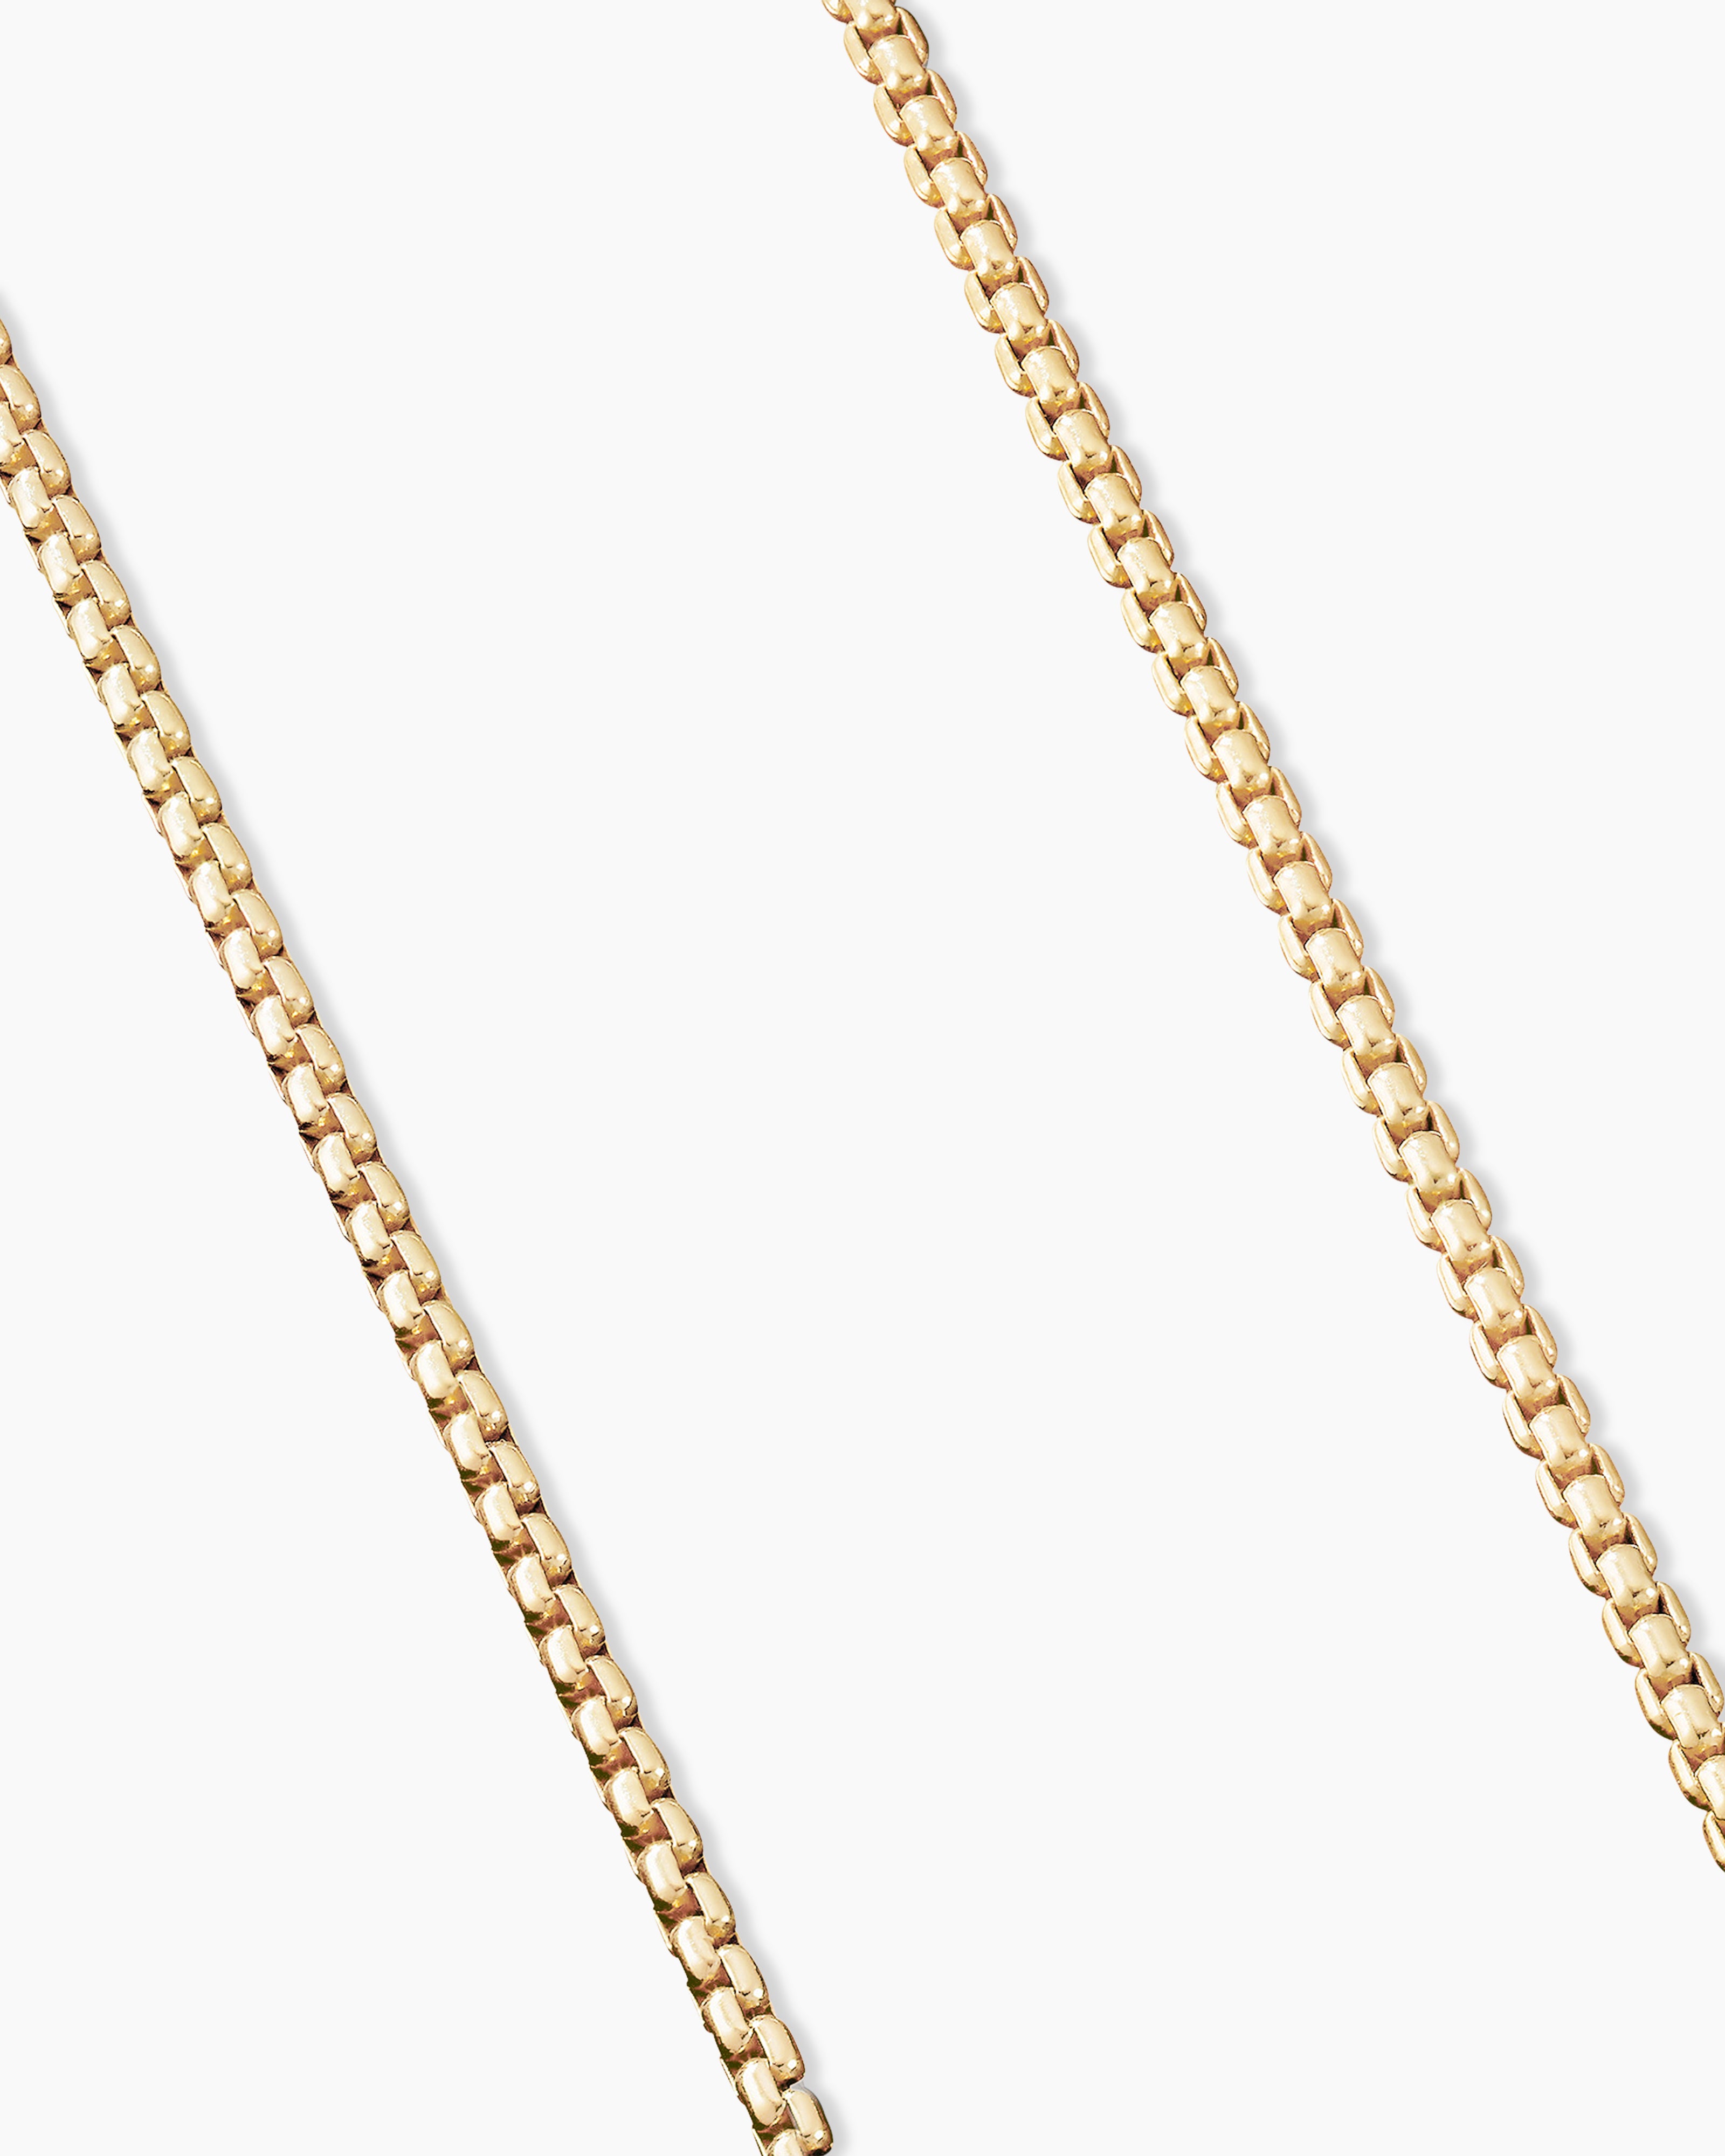 Box Chain Necklace in 18K Rose Gold, 3.4mm